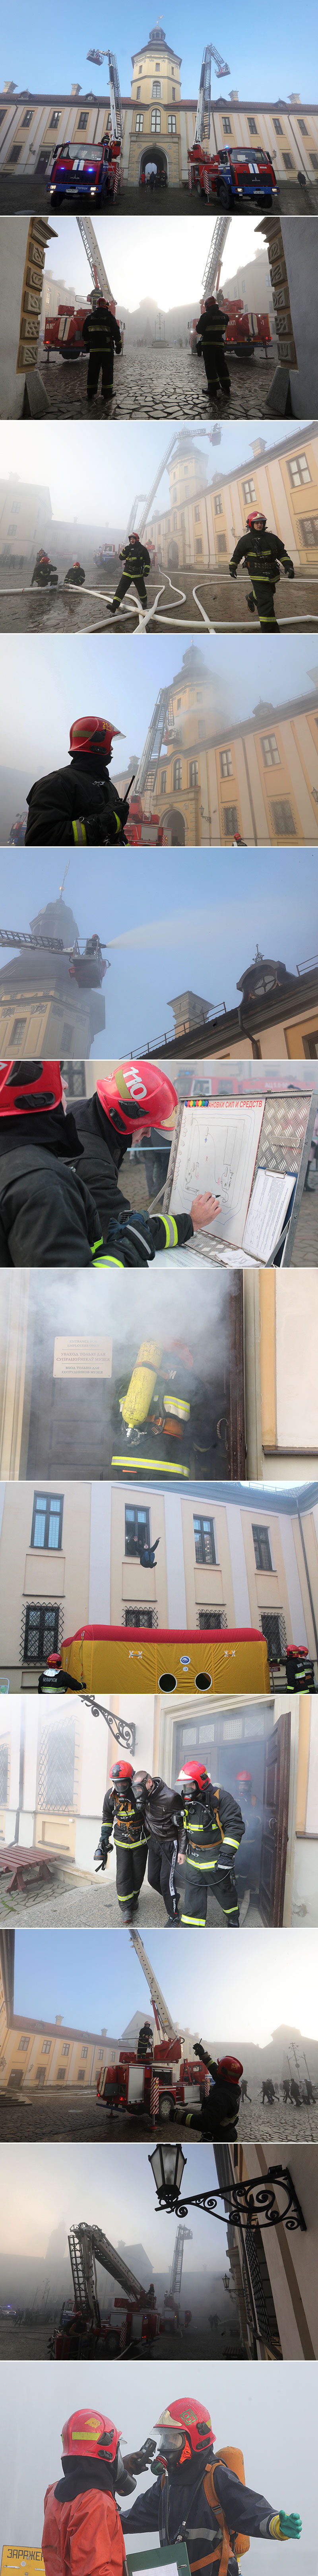 Drills of the Belarusian Emergencies Ministry in Nesvizh Castle